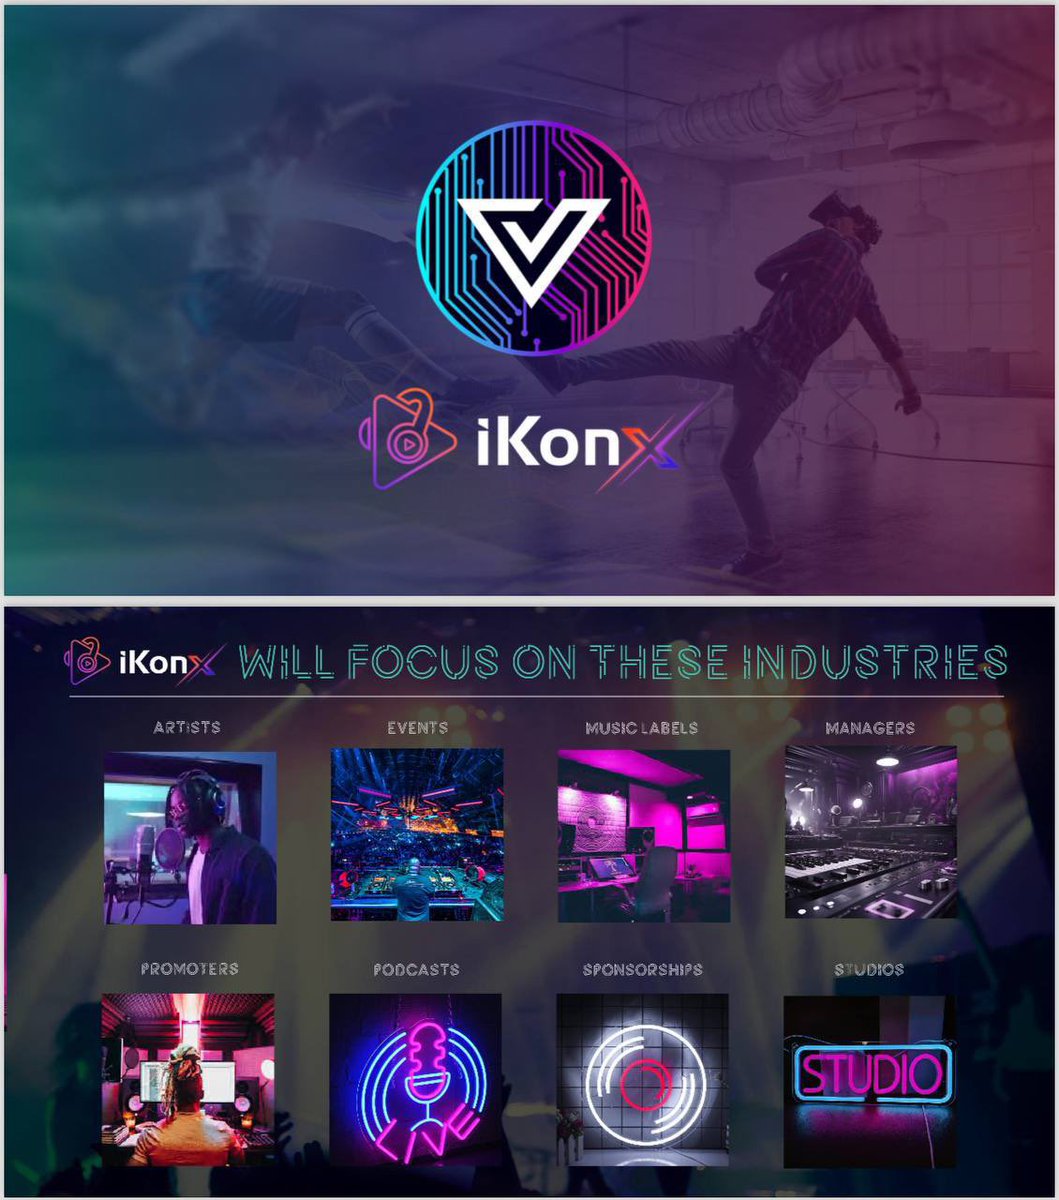 🚀 $VIZION is one of the best looking Utility projects our team has seen on Solana 🚀 💎 Could @viziontoken Be The Next 100x Hidden Gem? 💎 CA: 4giiLHQPdcuFnVcuBF7wpmfU88EXDdToJqBP8dfpSjtA TG: t.me/vizionhyperoom 📱 iKonX Music App 🎥 TV Series + Podcast 💎 $600k MC